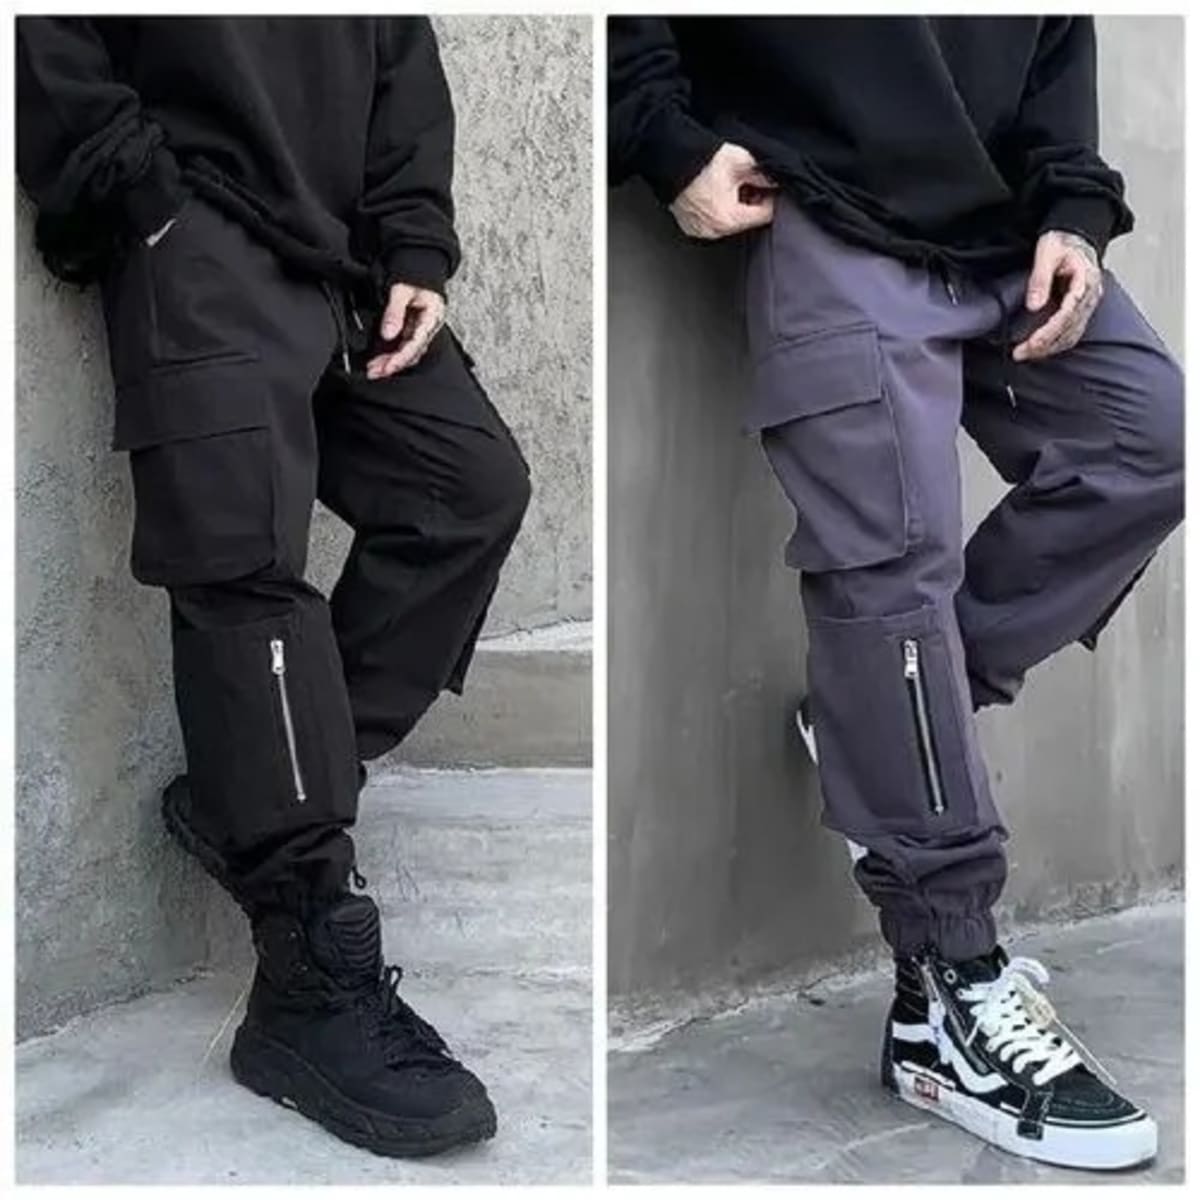 Mens Cargo Pants Athletic Running Sweatpants Casual Hip Hop Trousers